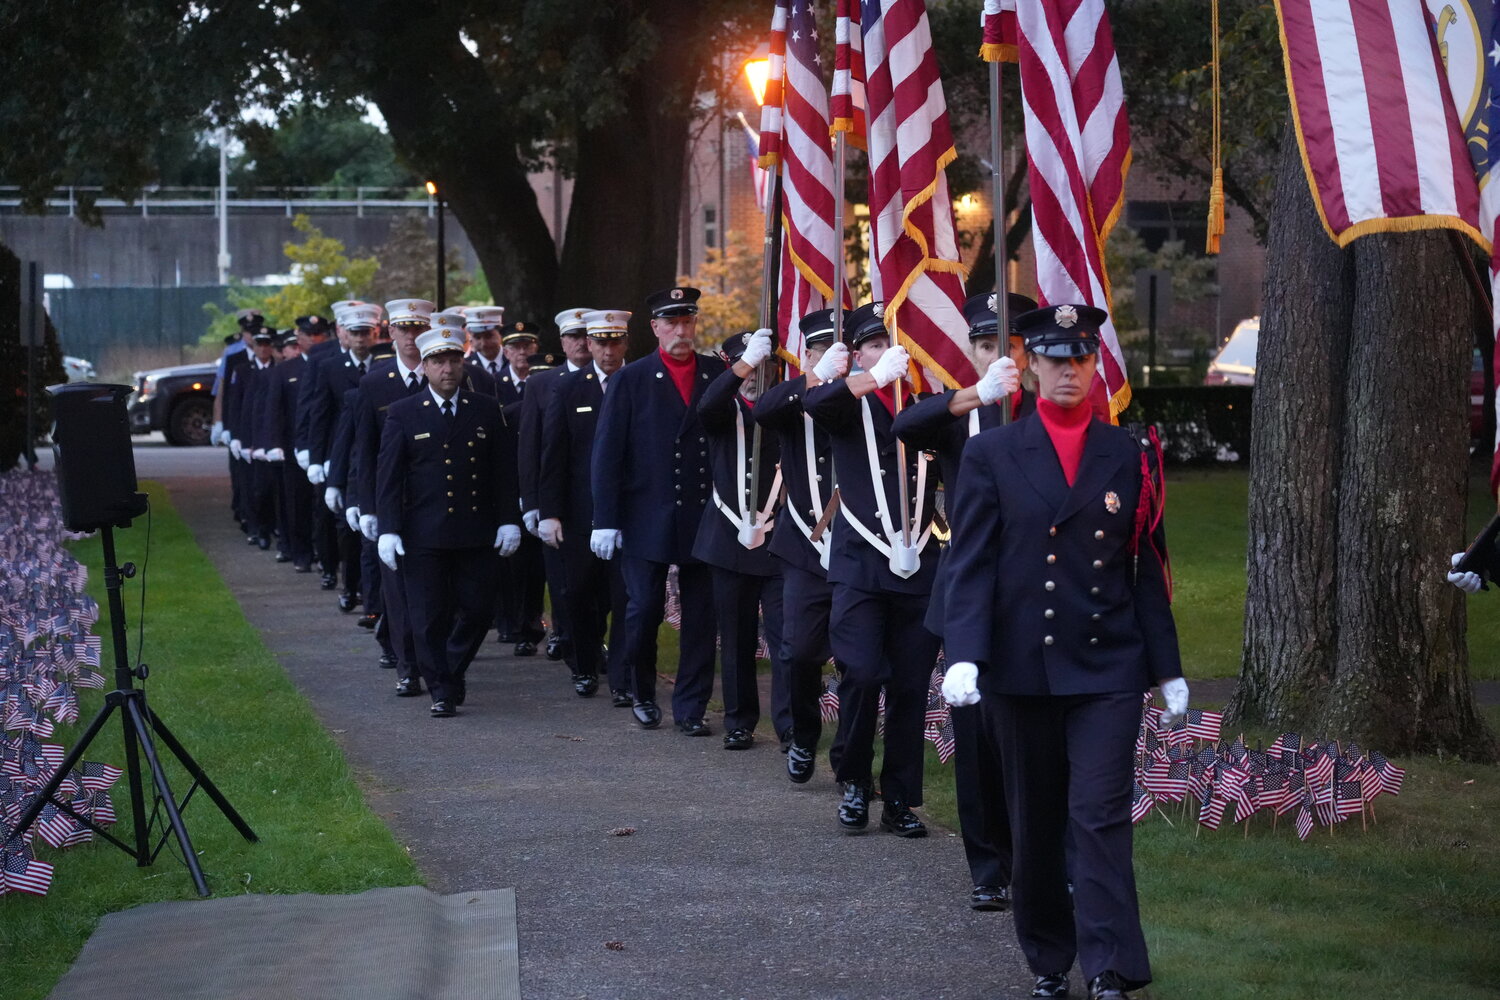 The Rockville Centre Police Department Color Guard started off the 9/11 memorial ceremony on Sunday night.